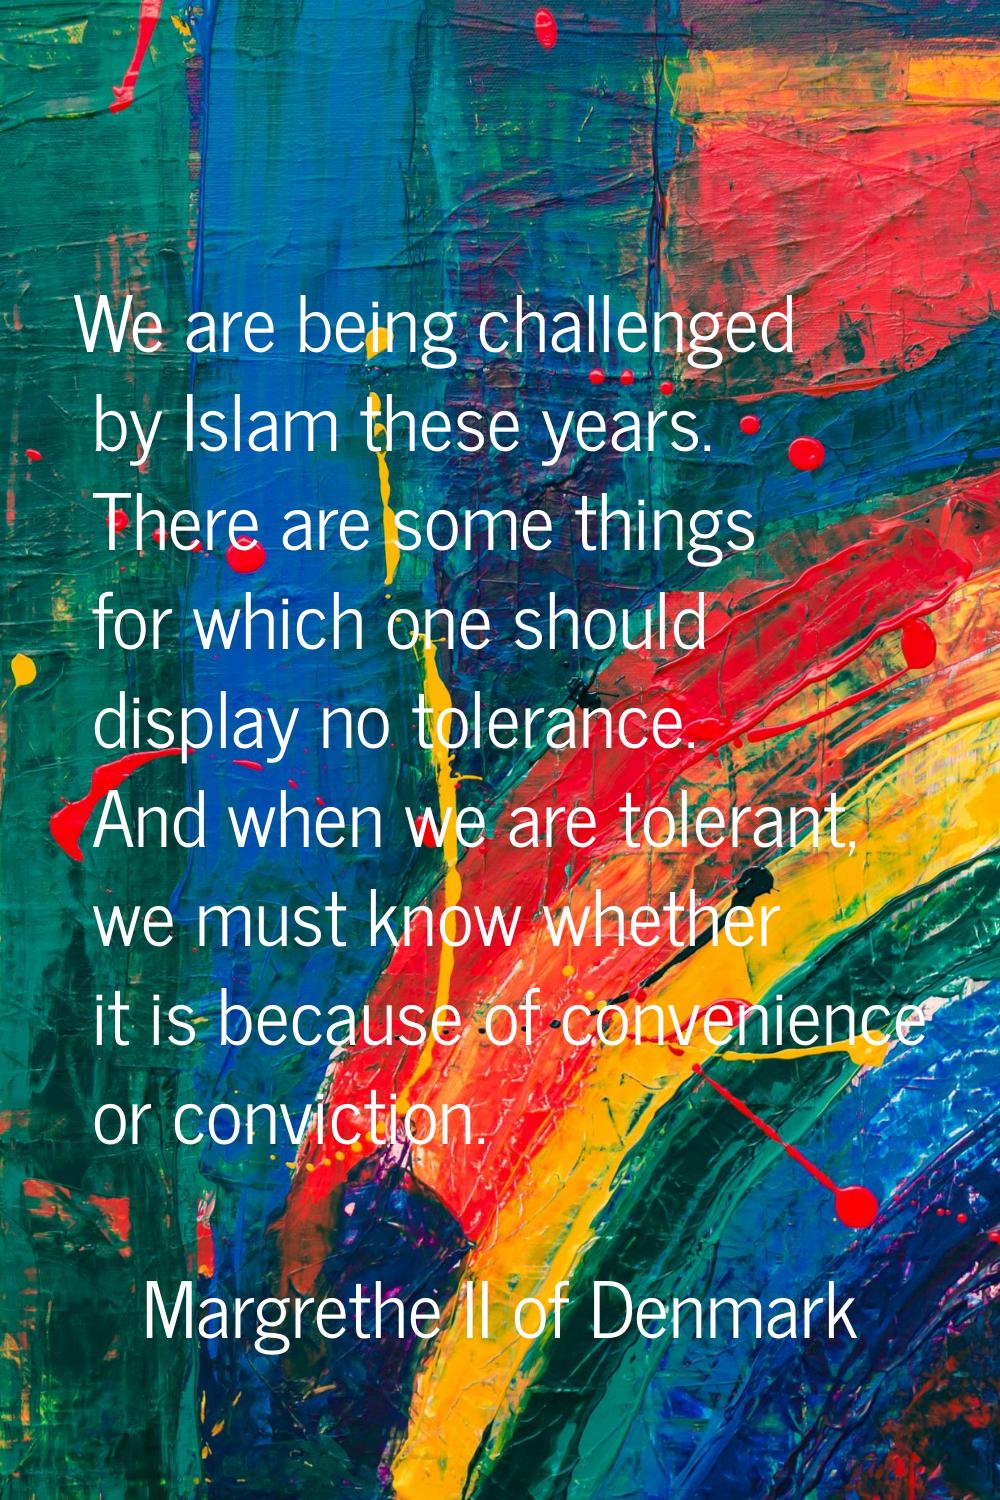 We are being challenged by Islam these years. There are some things for which one should display no